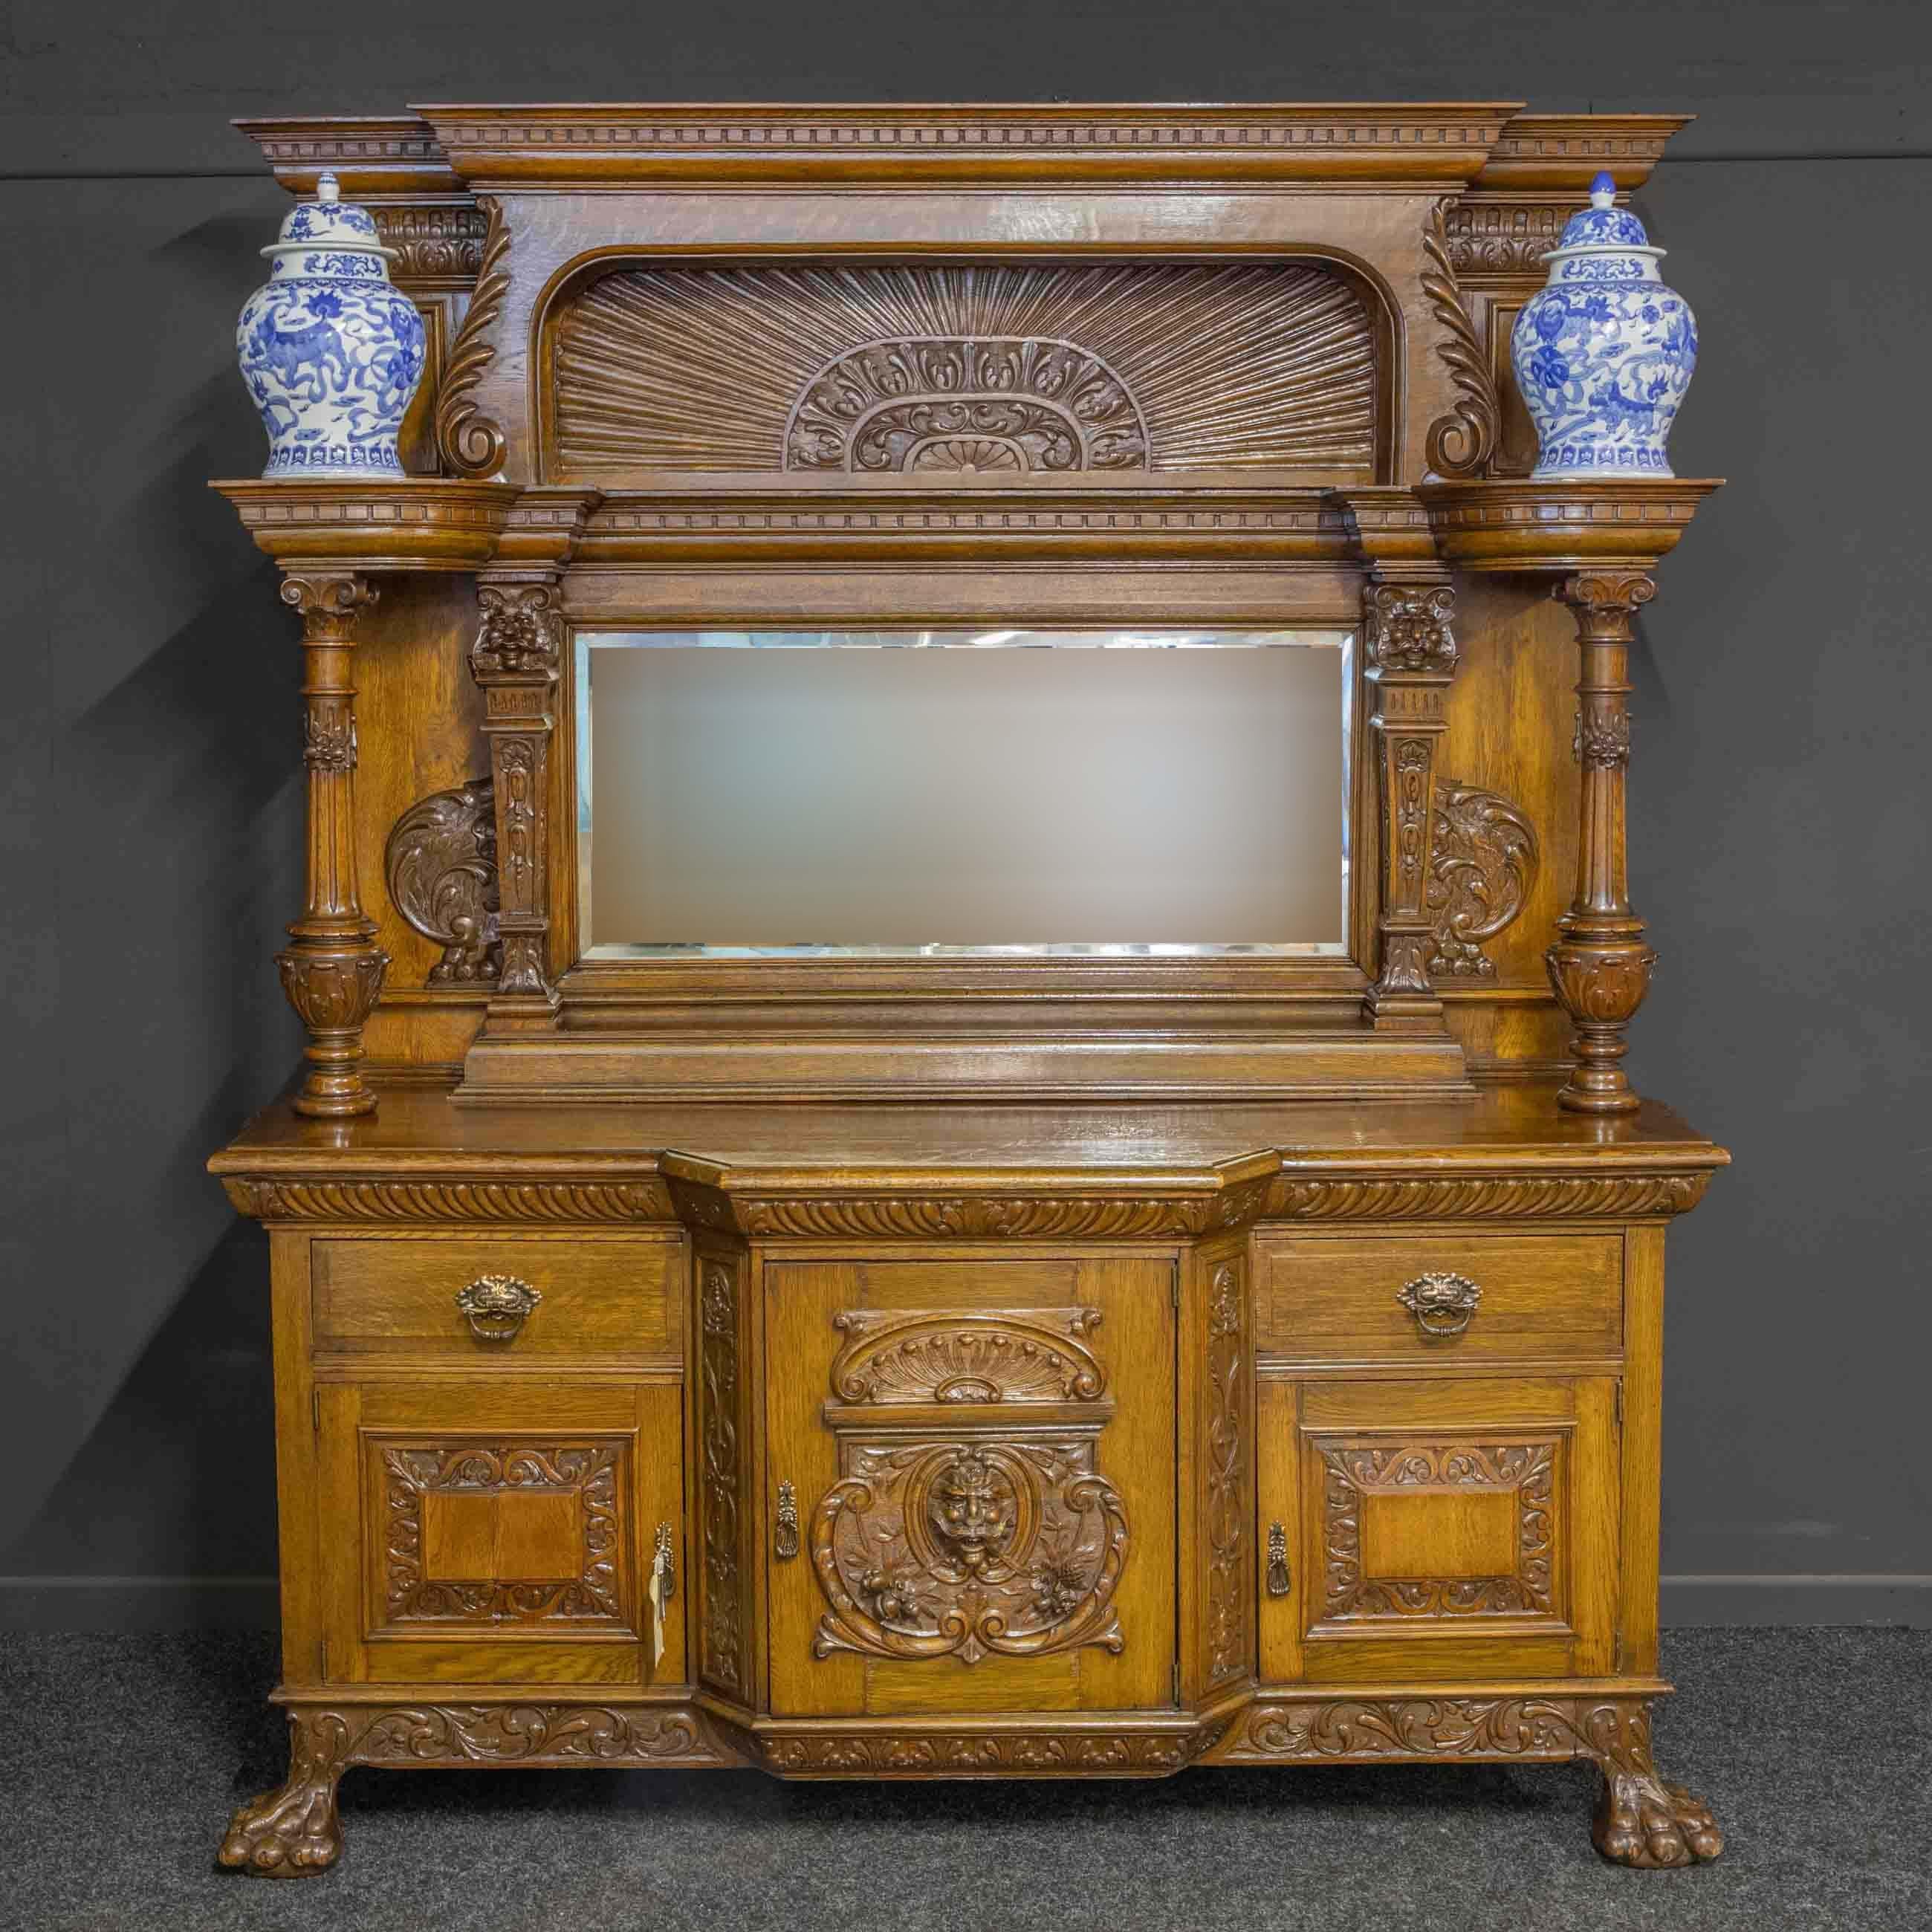 A monumental late Victorian oak sideboard of impressive size and quality. Of unusual design with large clawed feet that splay outwards to the side and front, above which is a crisply carved lower apron supporting three cupboards (with working locks